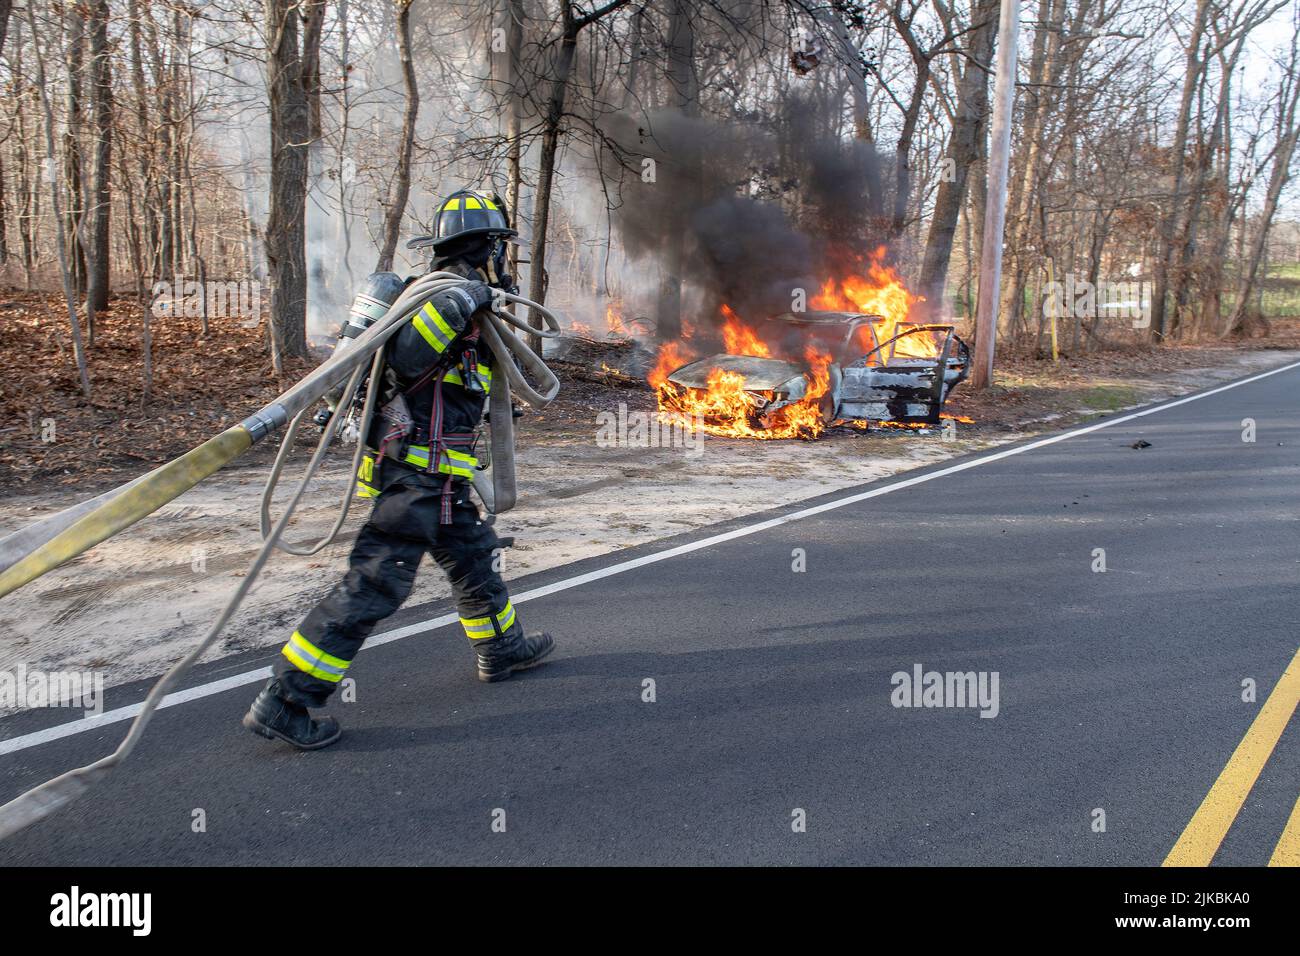 Members of the East Hampton Fire Department extinguish a working fire in an apparently abandoned vehicle in front of 404 Accabonac Road at 2:40 p.m. Stock Photo